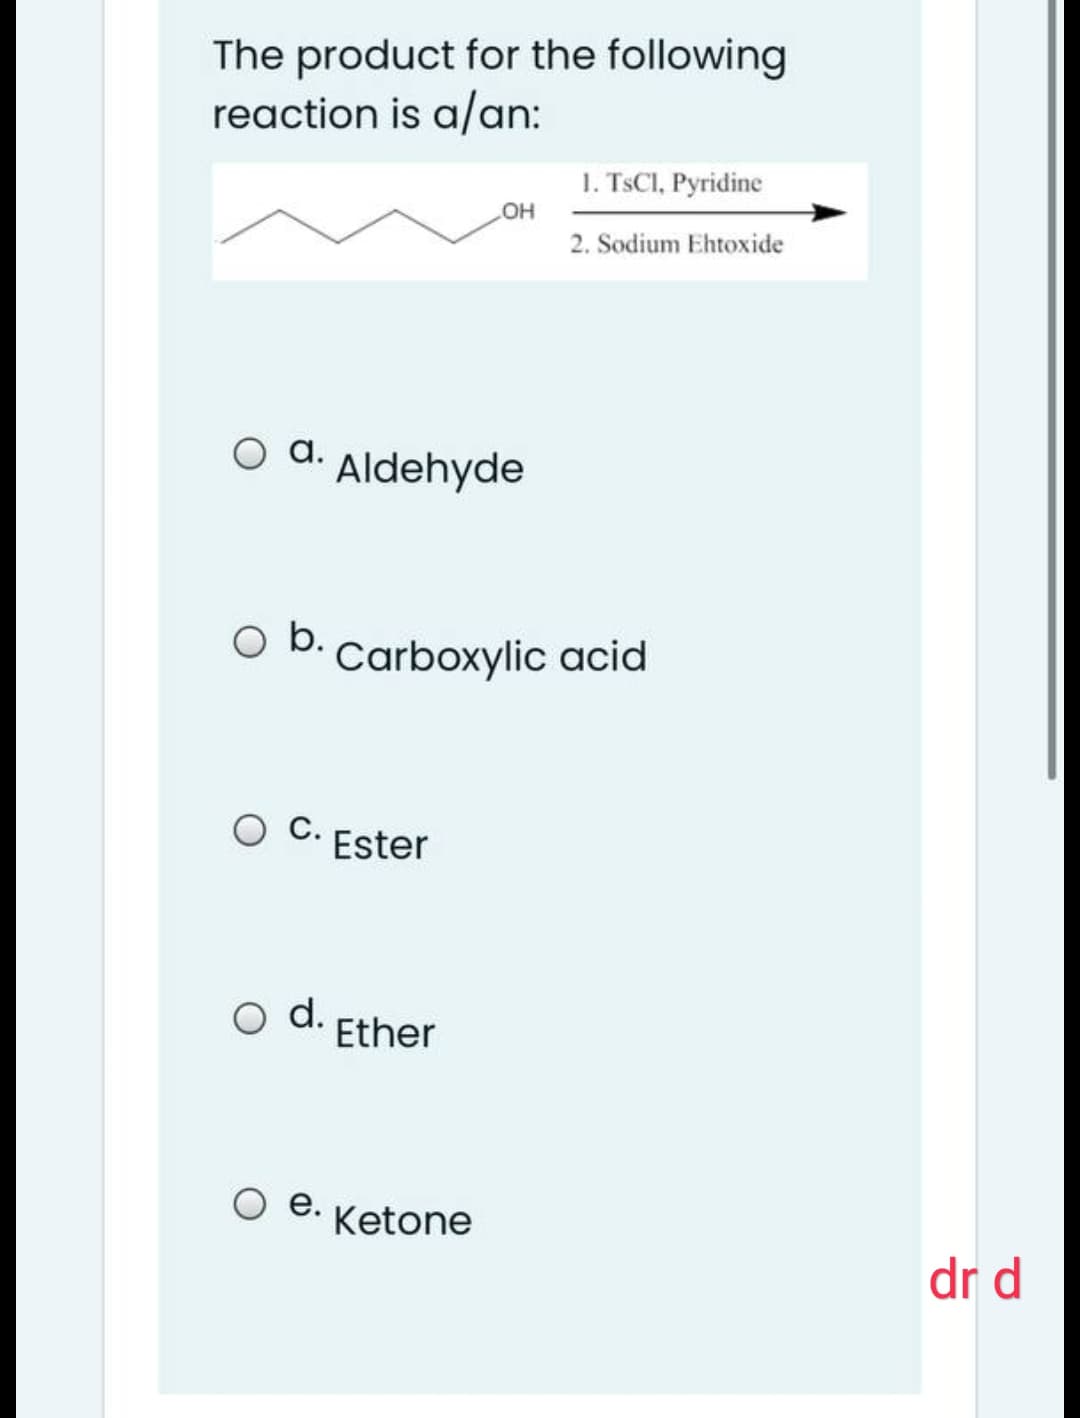 The product for the following
reaction is a/an:
1. TSCI, Pyridine
OH
2. Sodium Ehtoxide
оа.
Aldehyde
O b. Carboxylic acid
С.
Ester
d.
Ether
е.
Ketone
dr d
